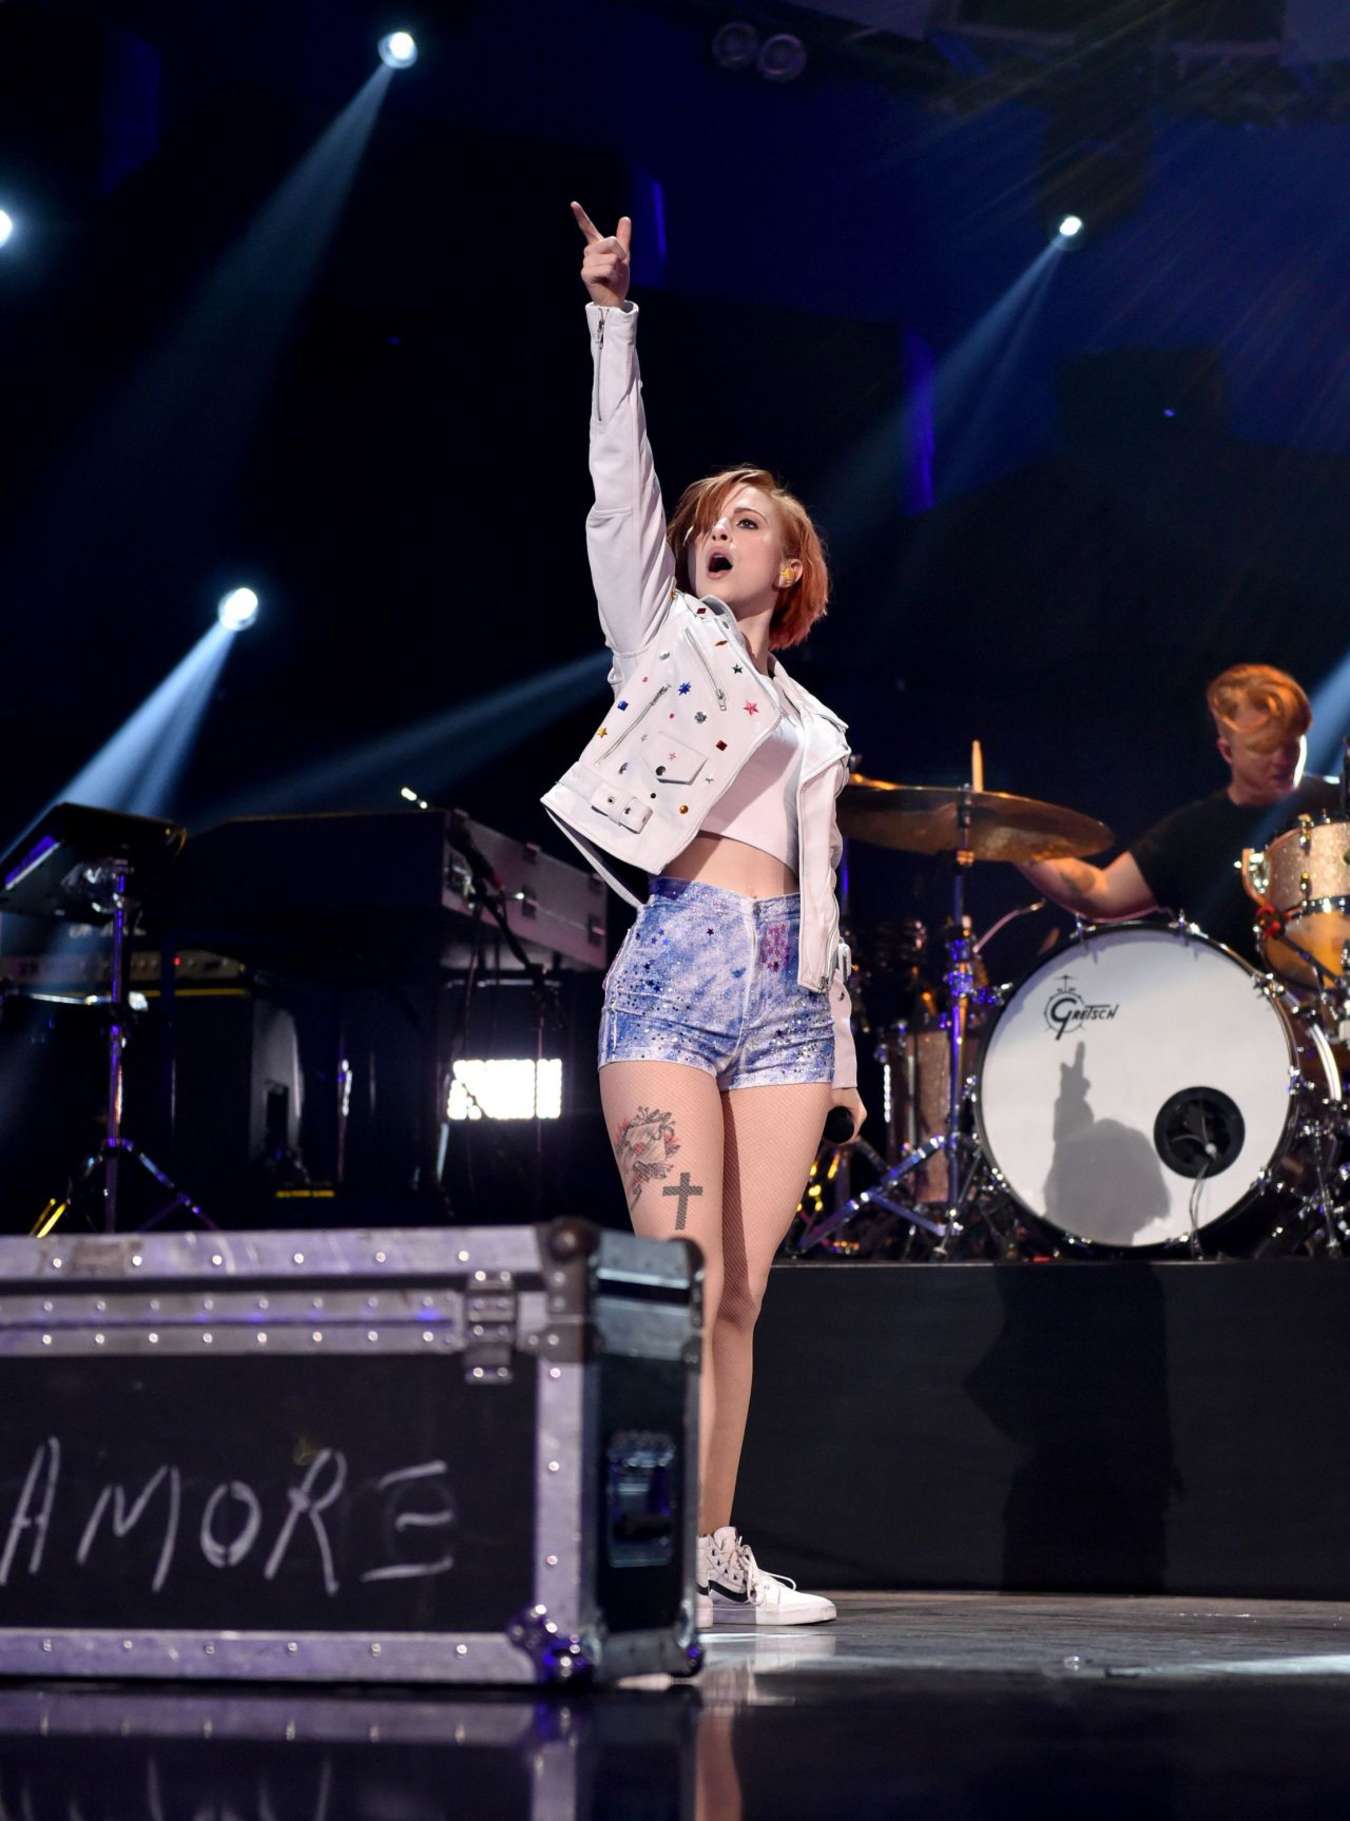 Hayley Williams Performs Live at 2014 iHeartRadio Music Festival